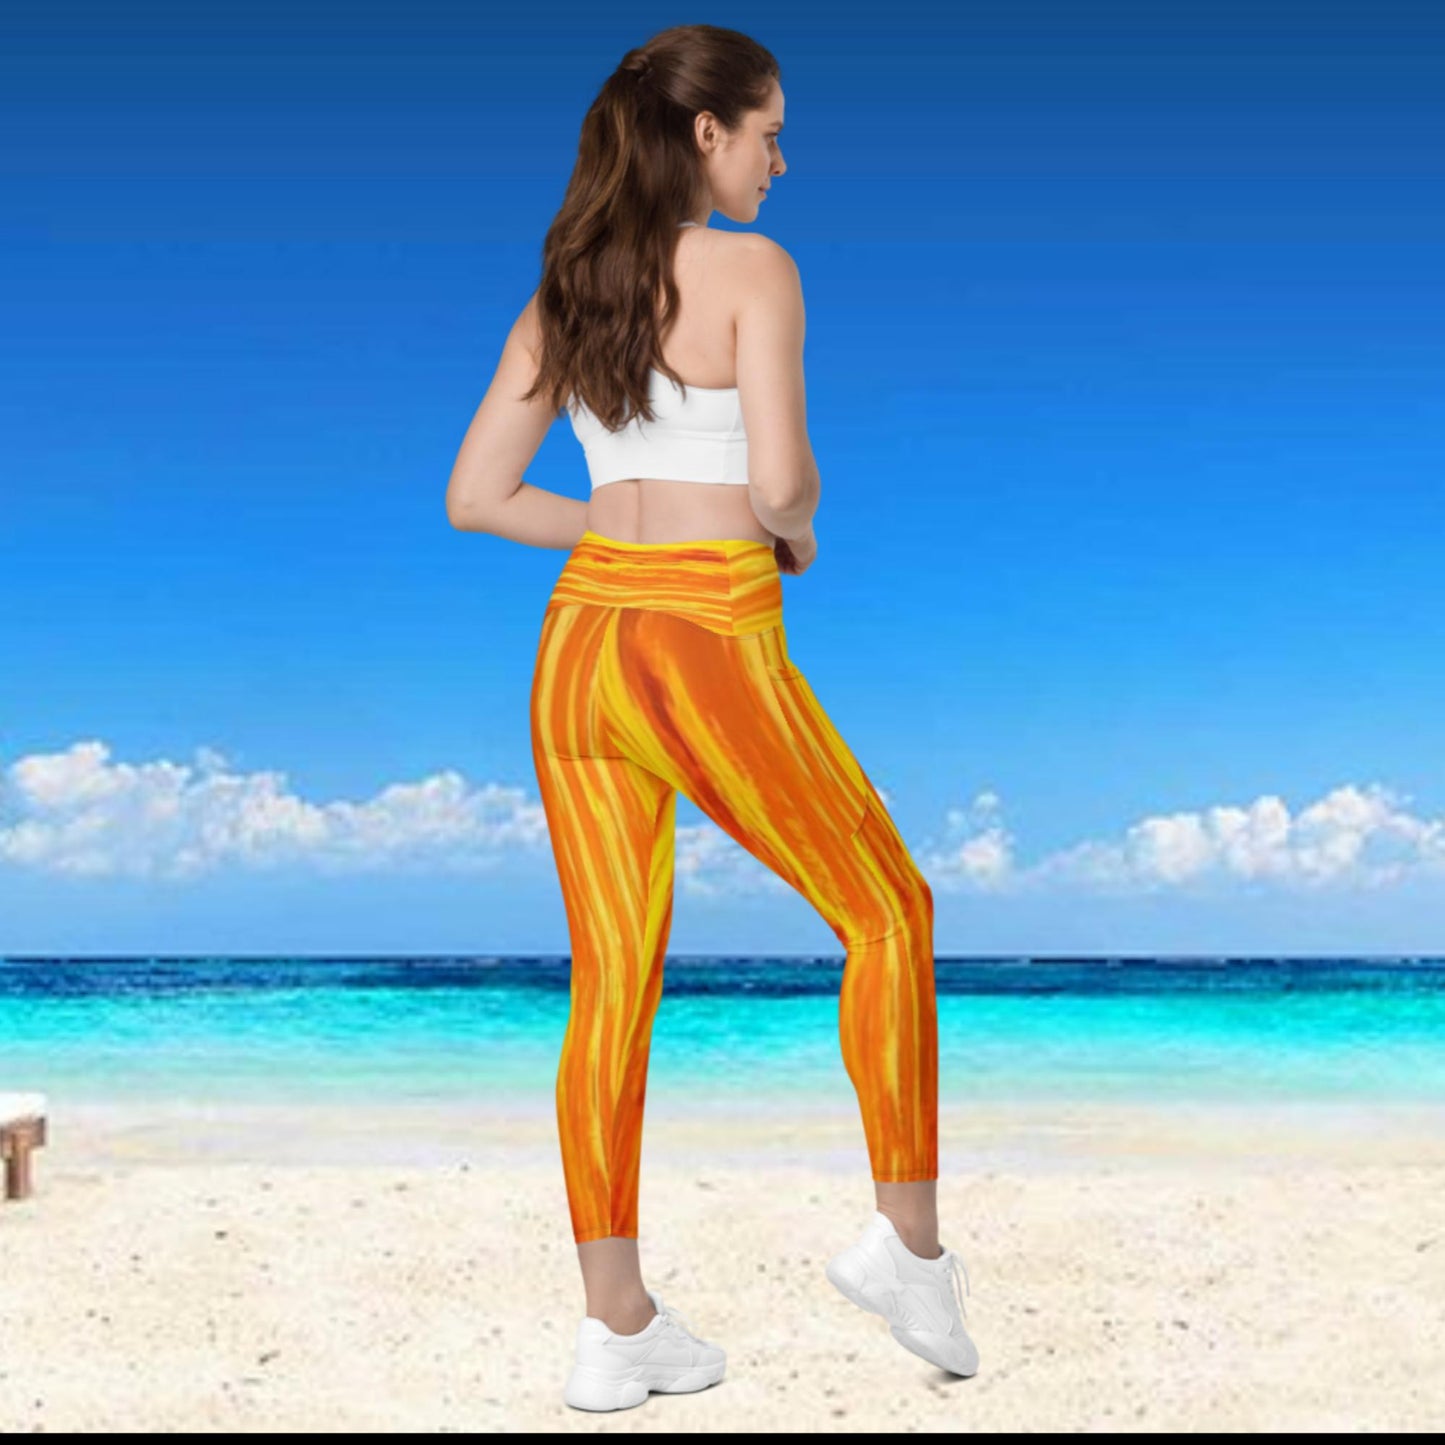 JAMAICAN SUNSET - Crossover leggings with pockets - 2XS thru 6XL - See size chart